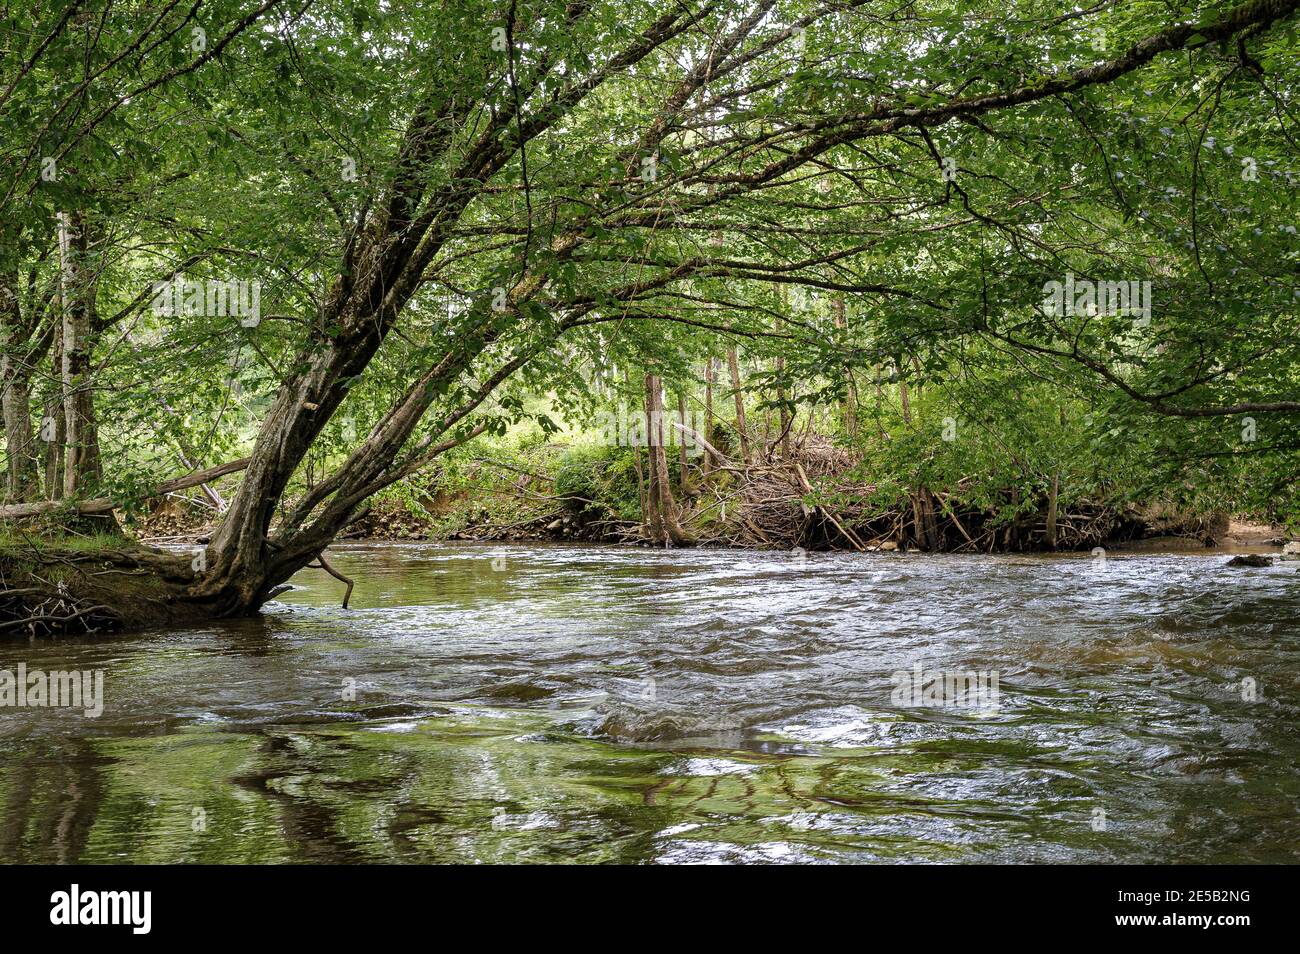 In the curve of a river, the willows are leaning over the water. Green reflections on the clear water. Stock Photo